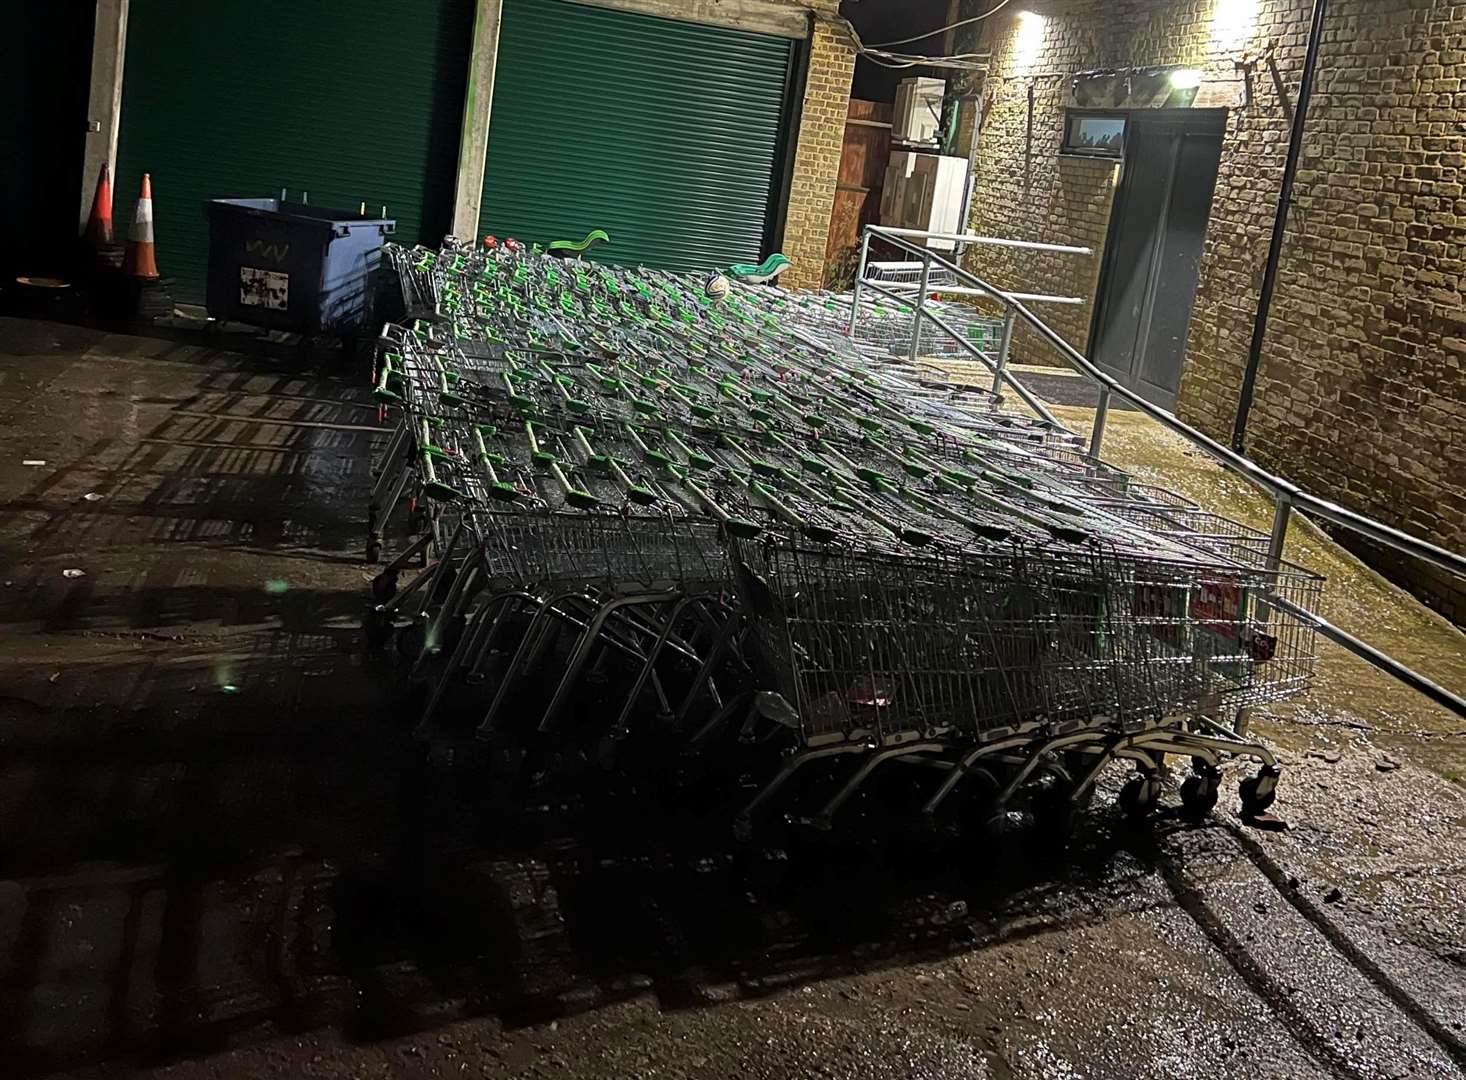 Trollies being held at Swanley Town Council's compound